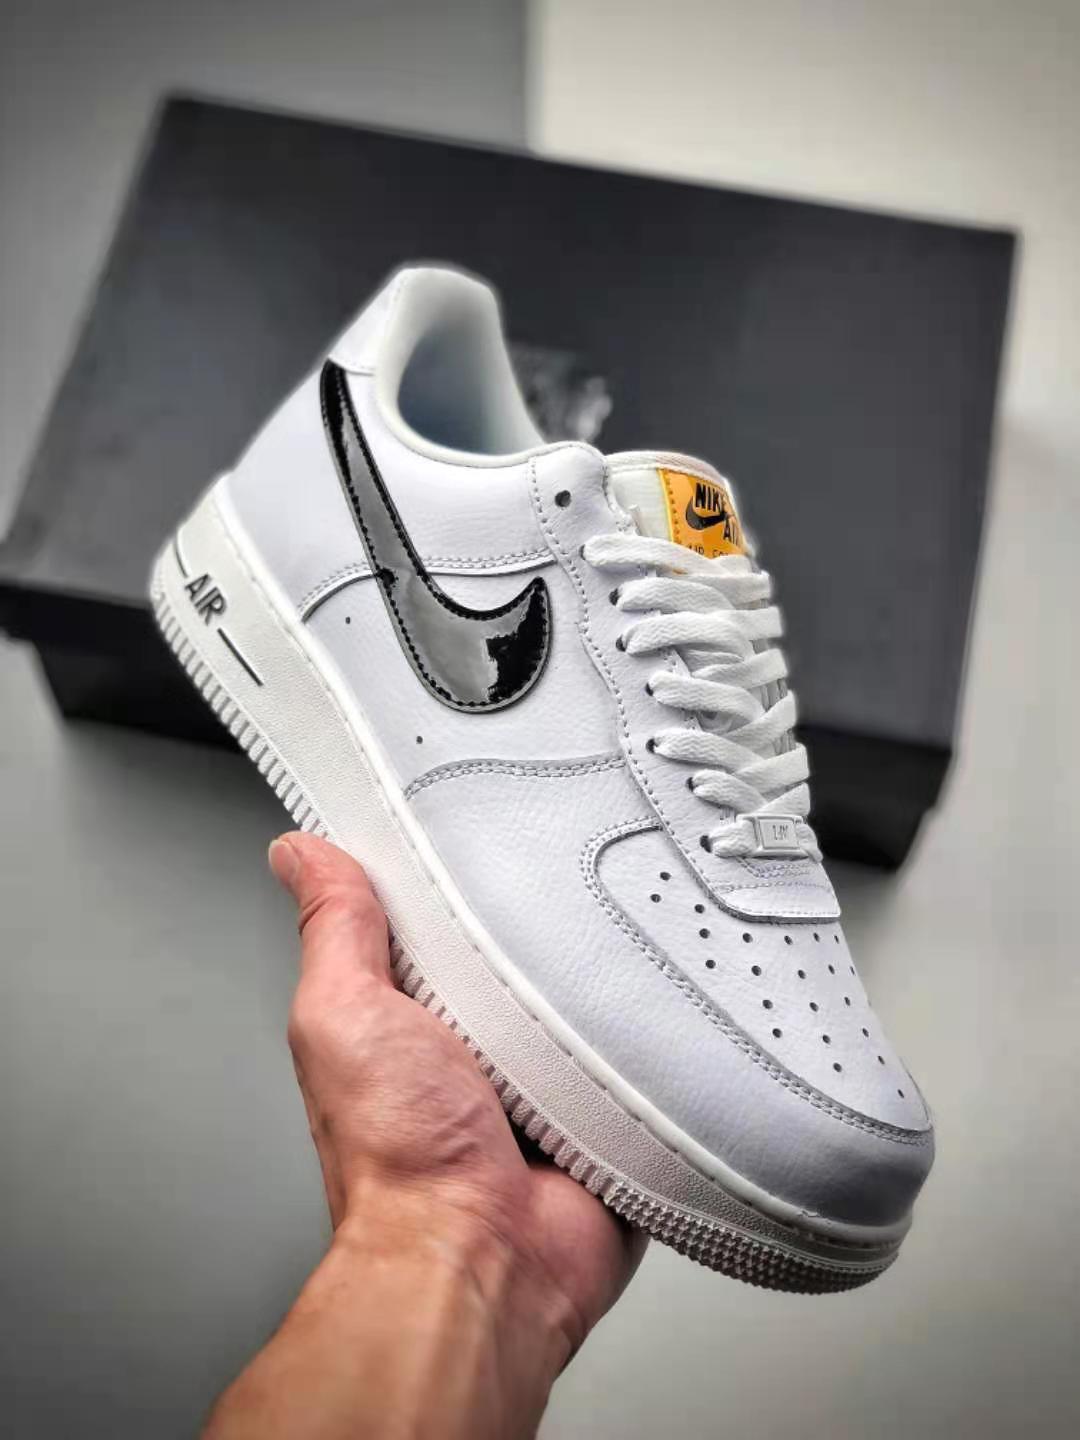 Nike Air Force 1 Low SE 'White' CI3446-100 - Stylish and Iconic Classic